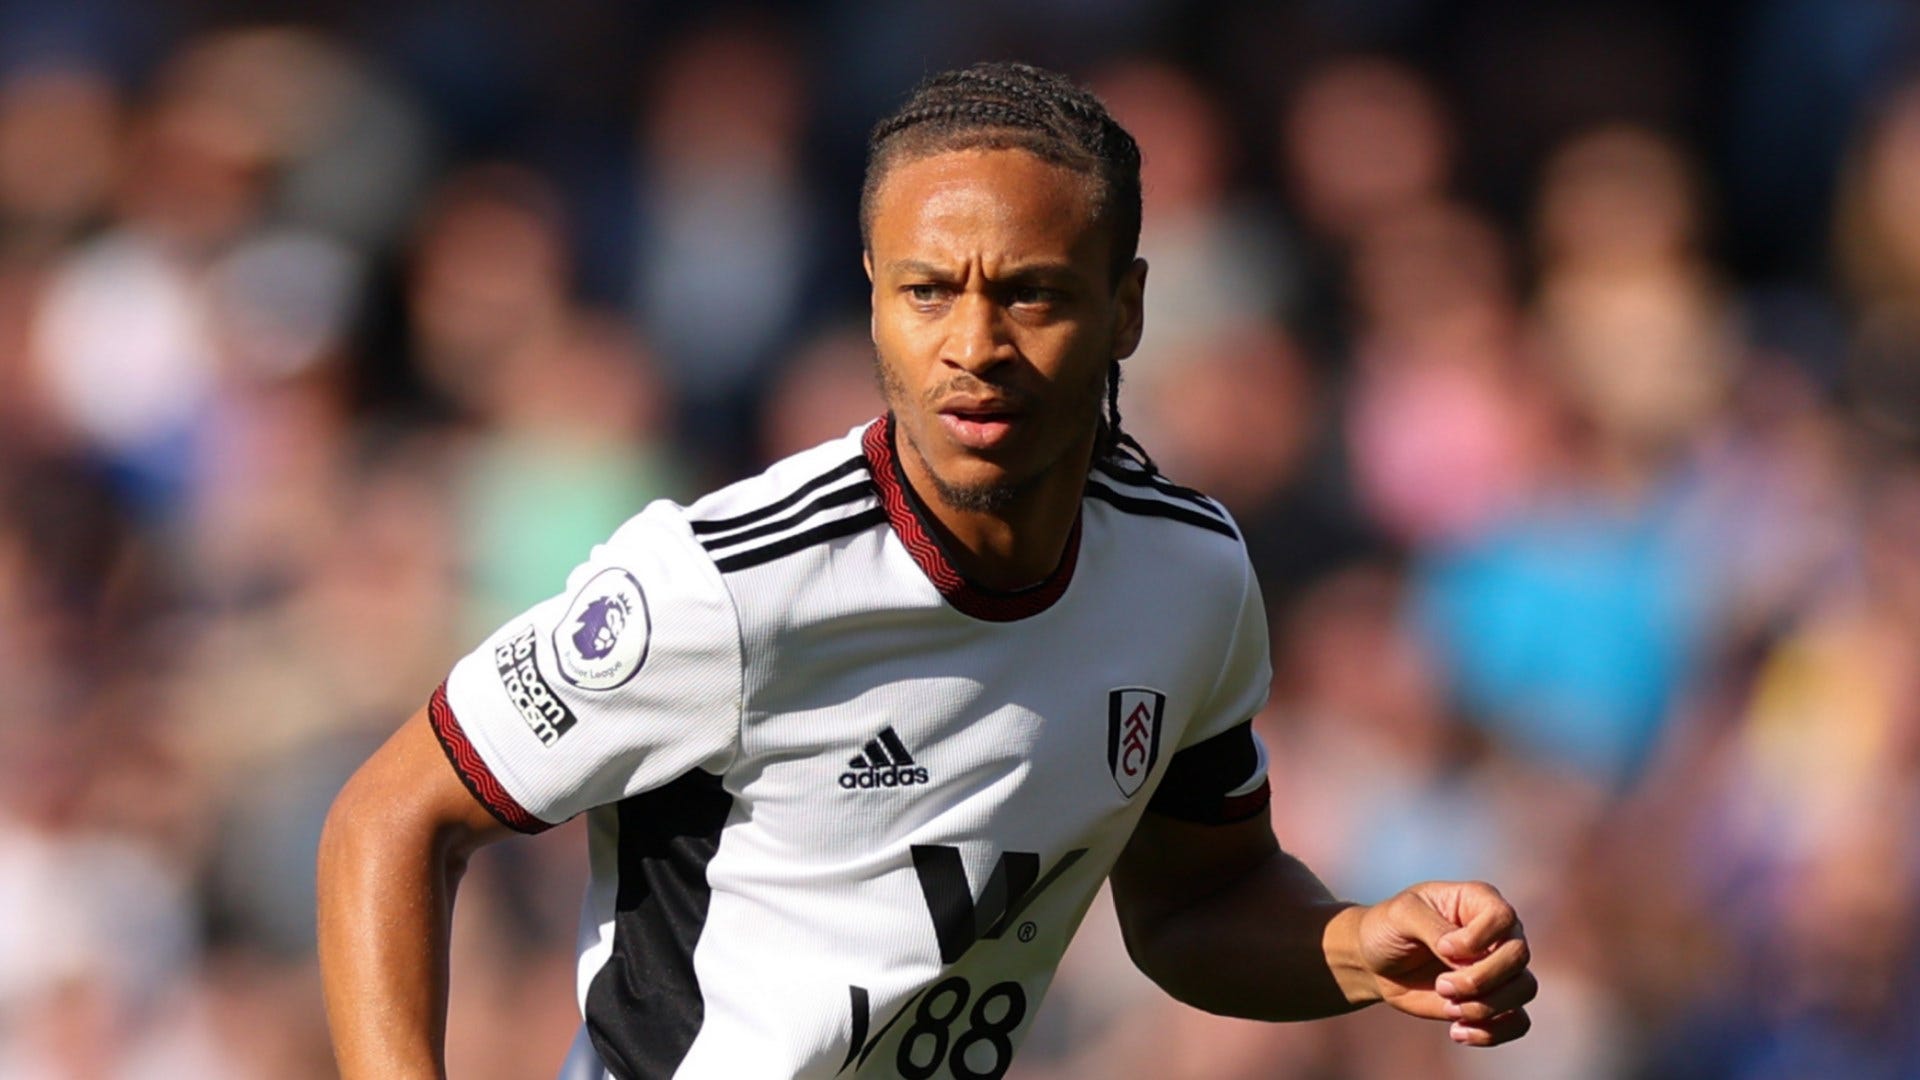 Fulham vs Brentford Where to watch the match online, live stream, TV channels, and kick-off time Goal US